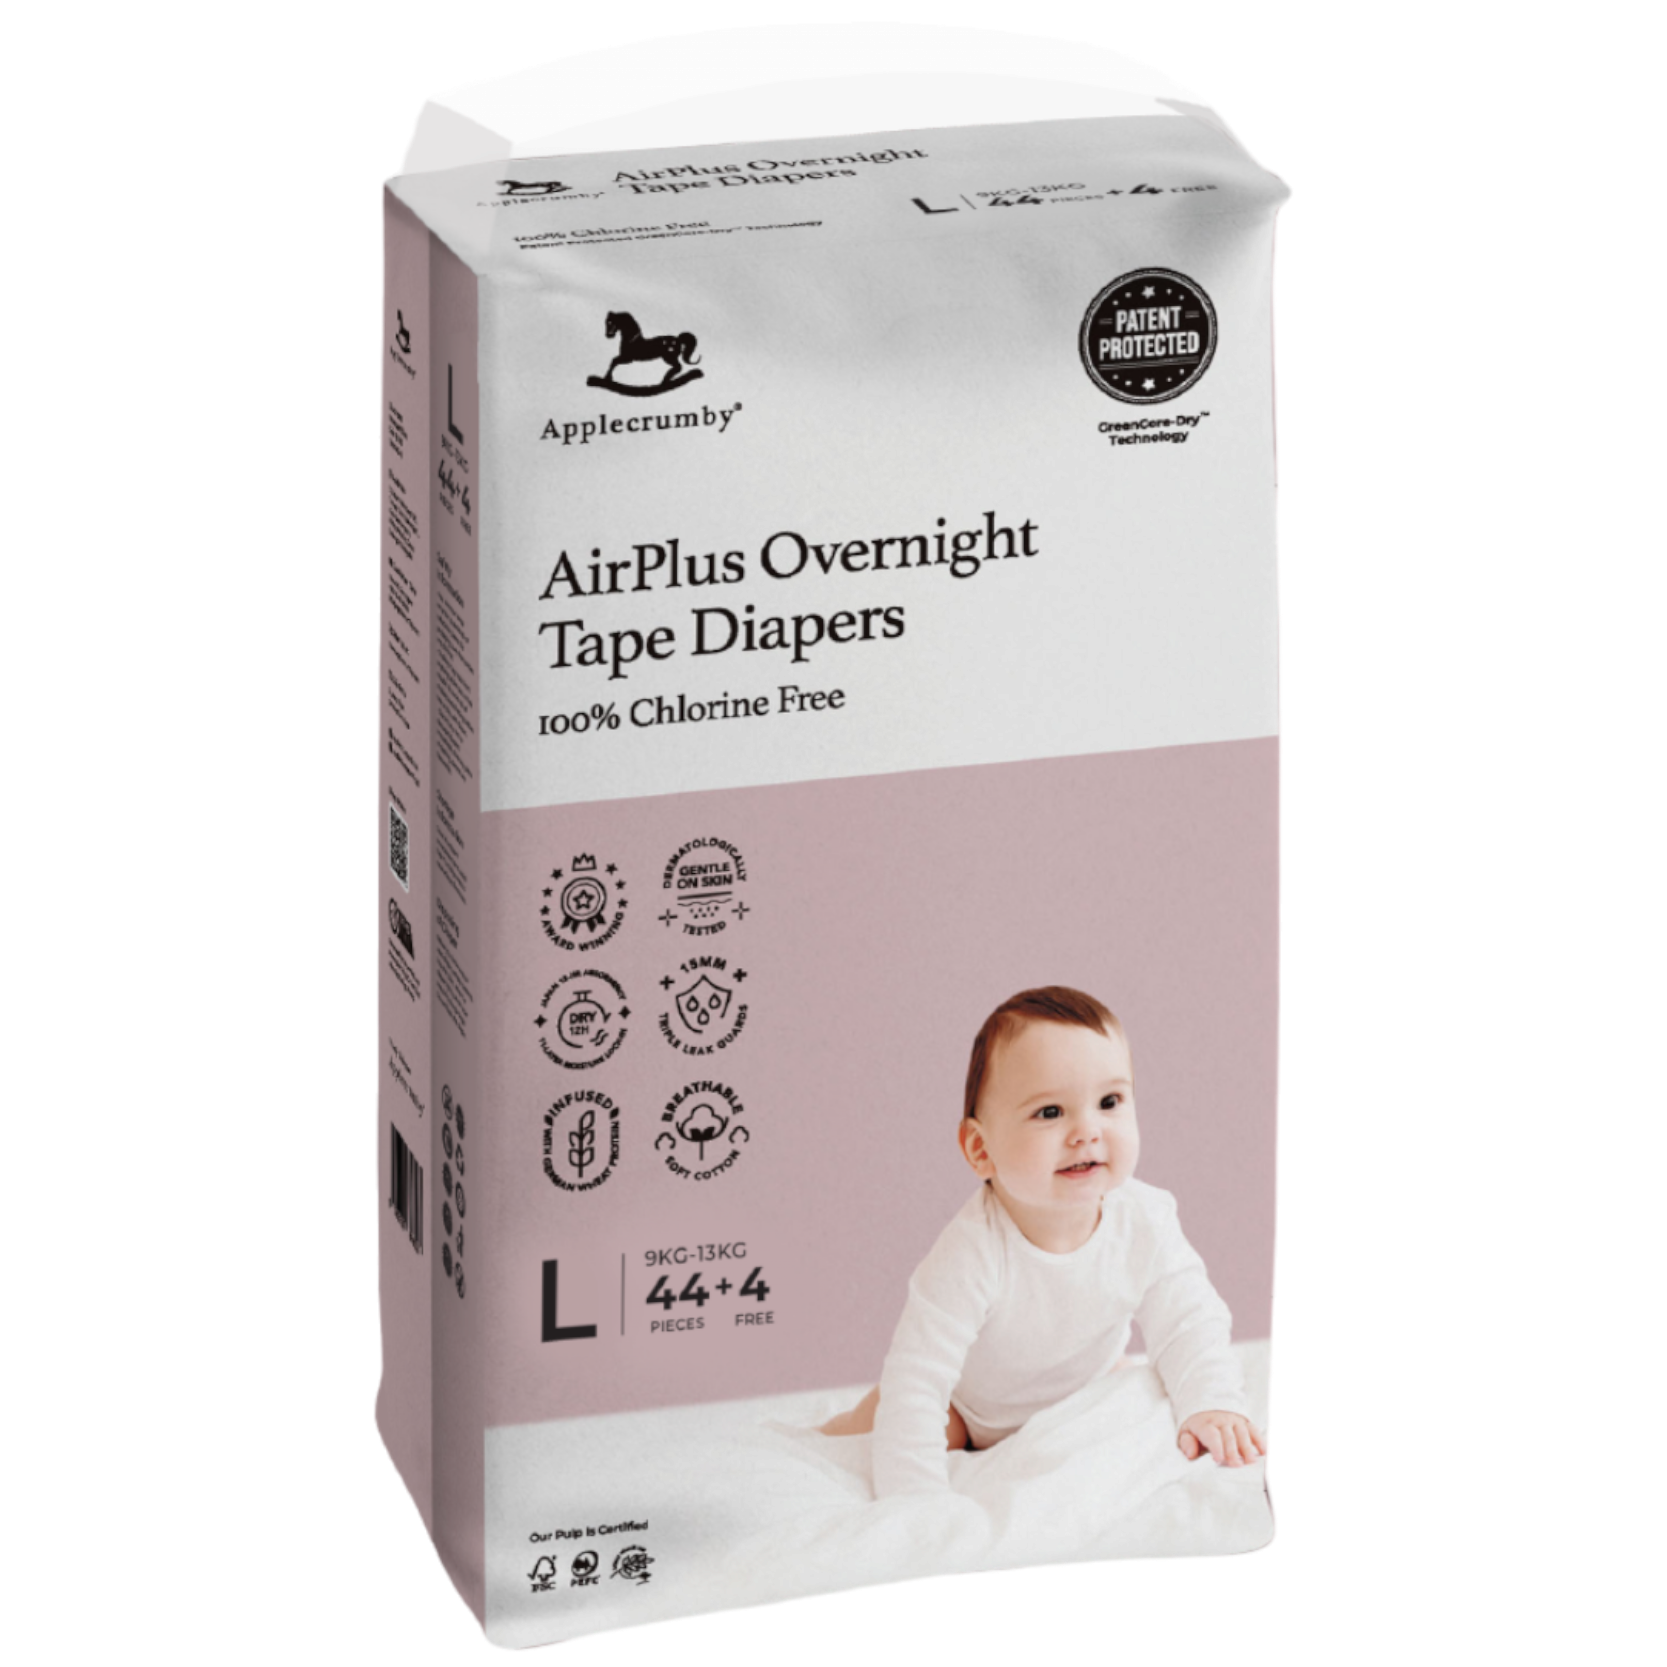 APPLECRUMBY Airplus Overnight Tape Diapers L [9kg-13kg] [44+4pcs]